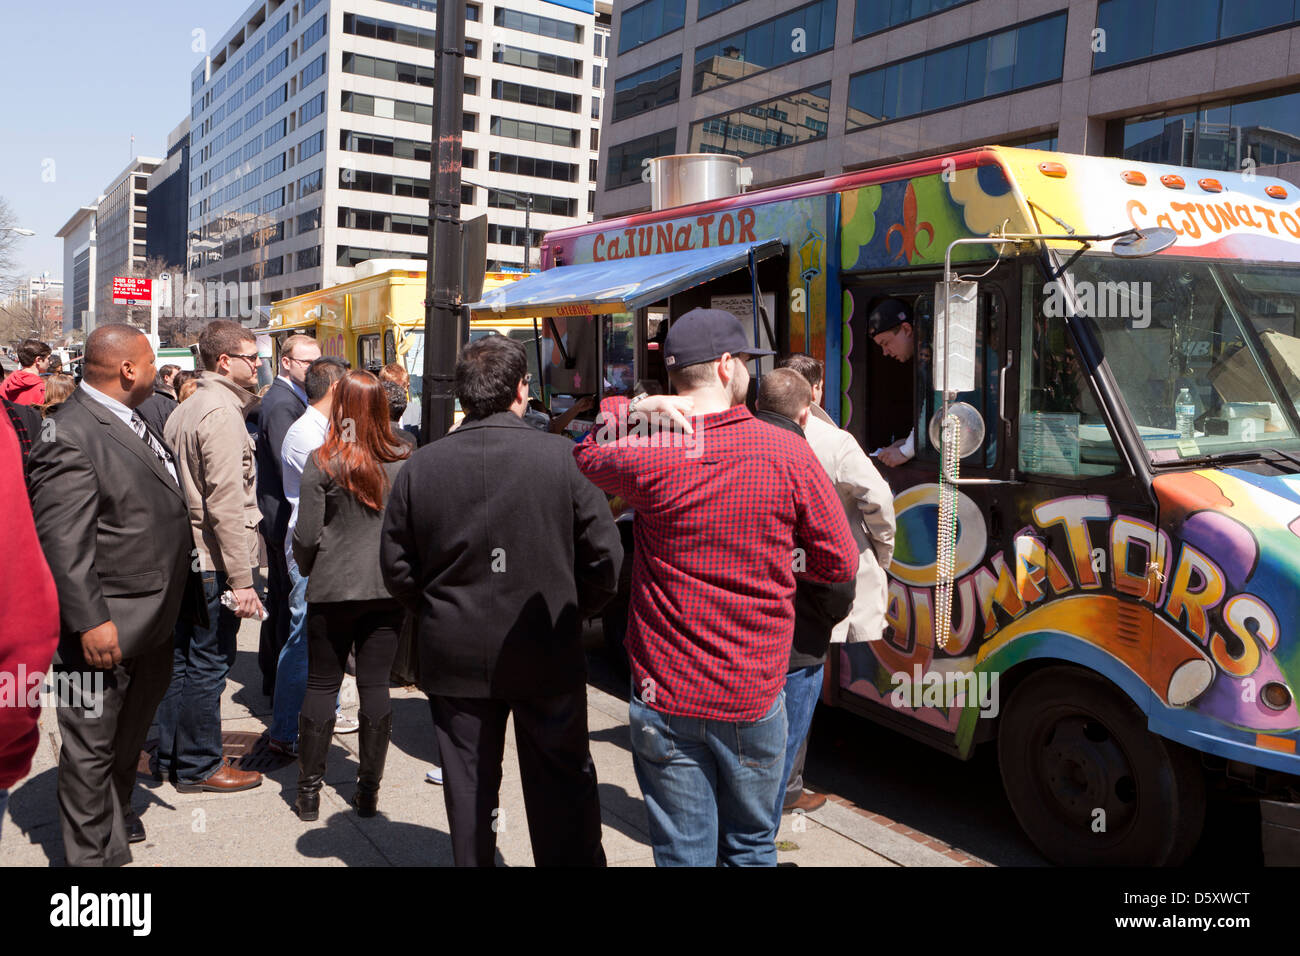 People in queue at a Food truck - USA Stock Photo